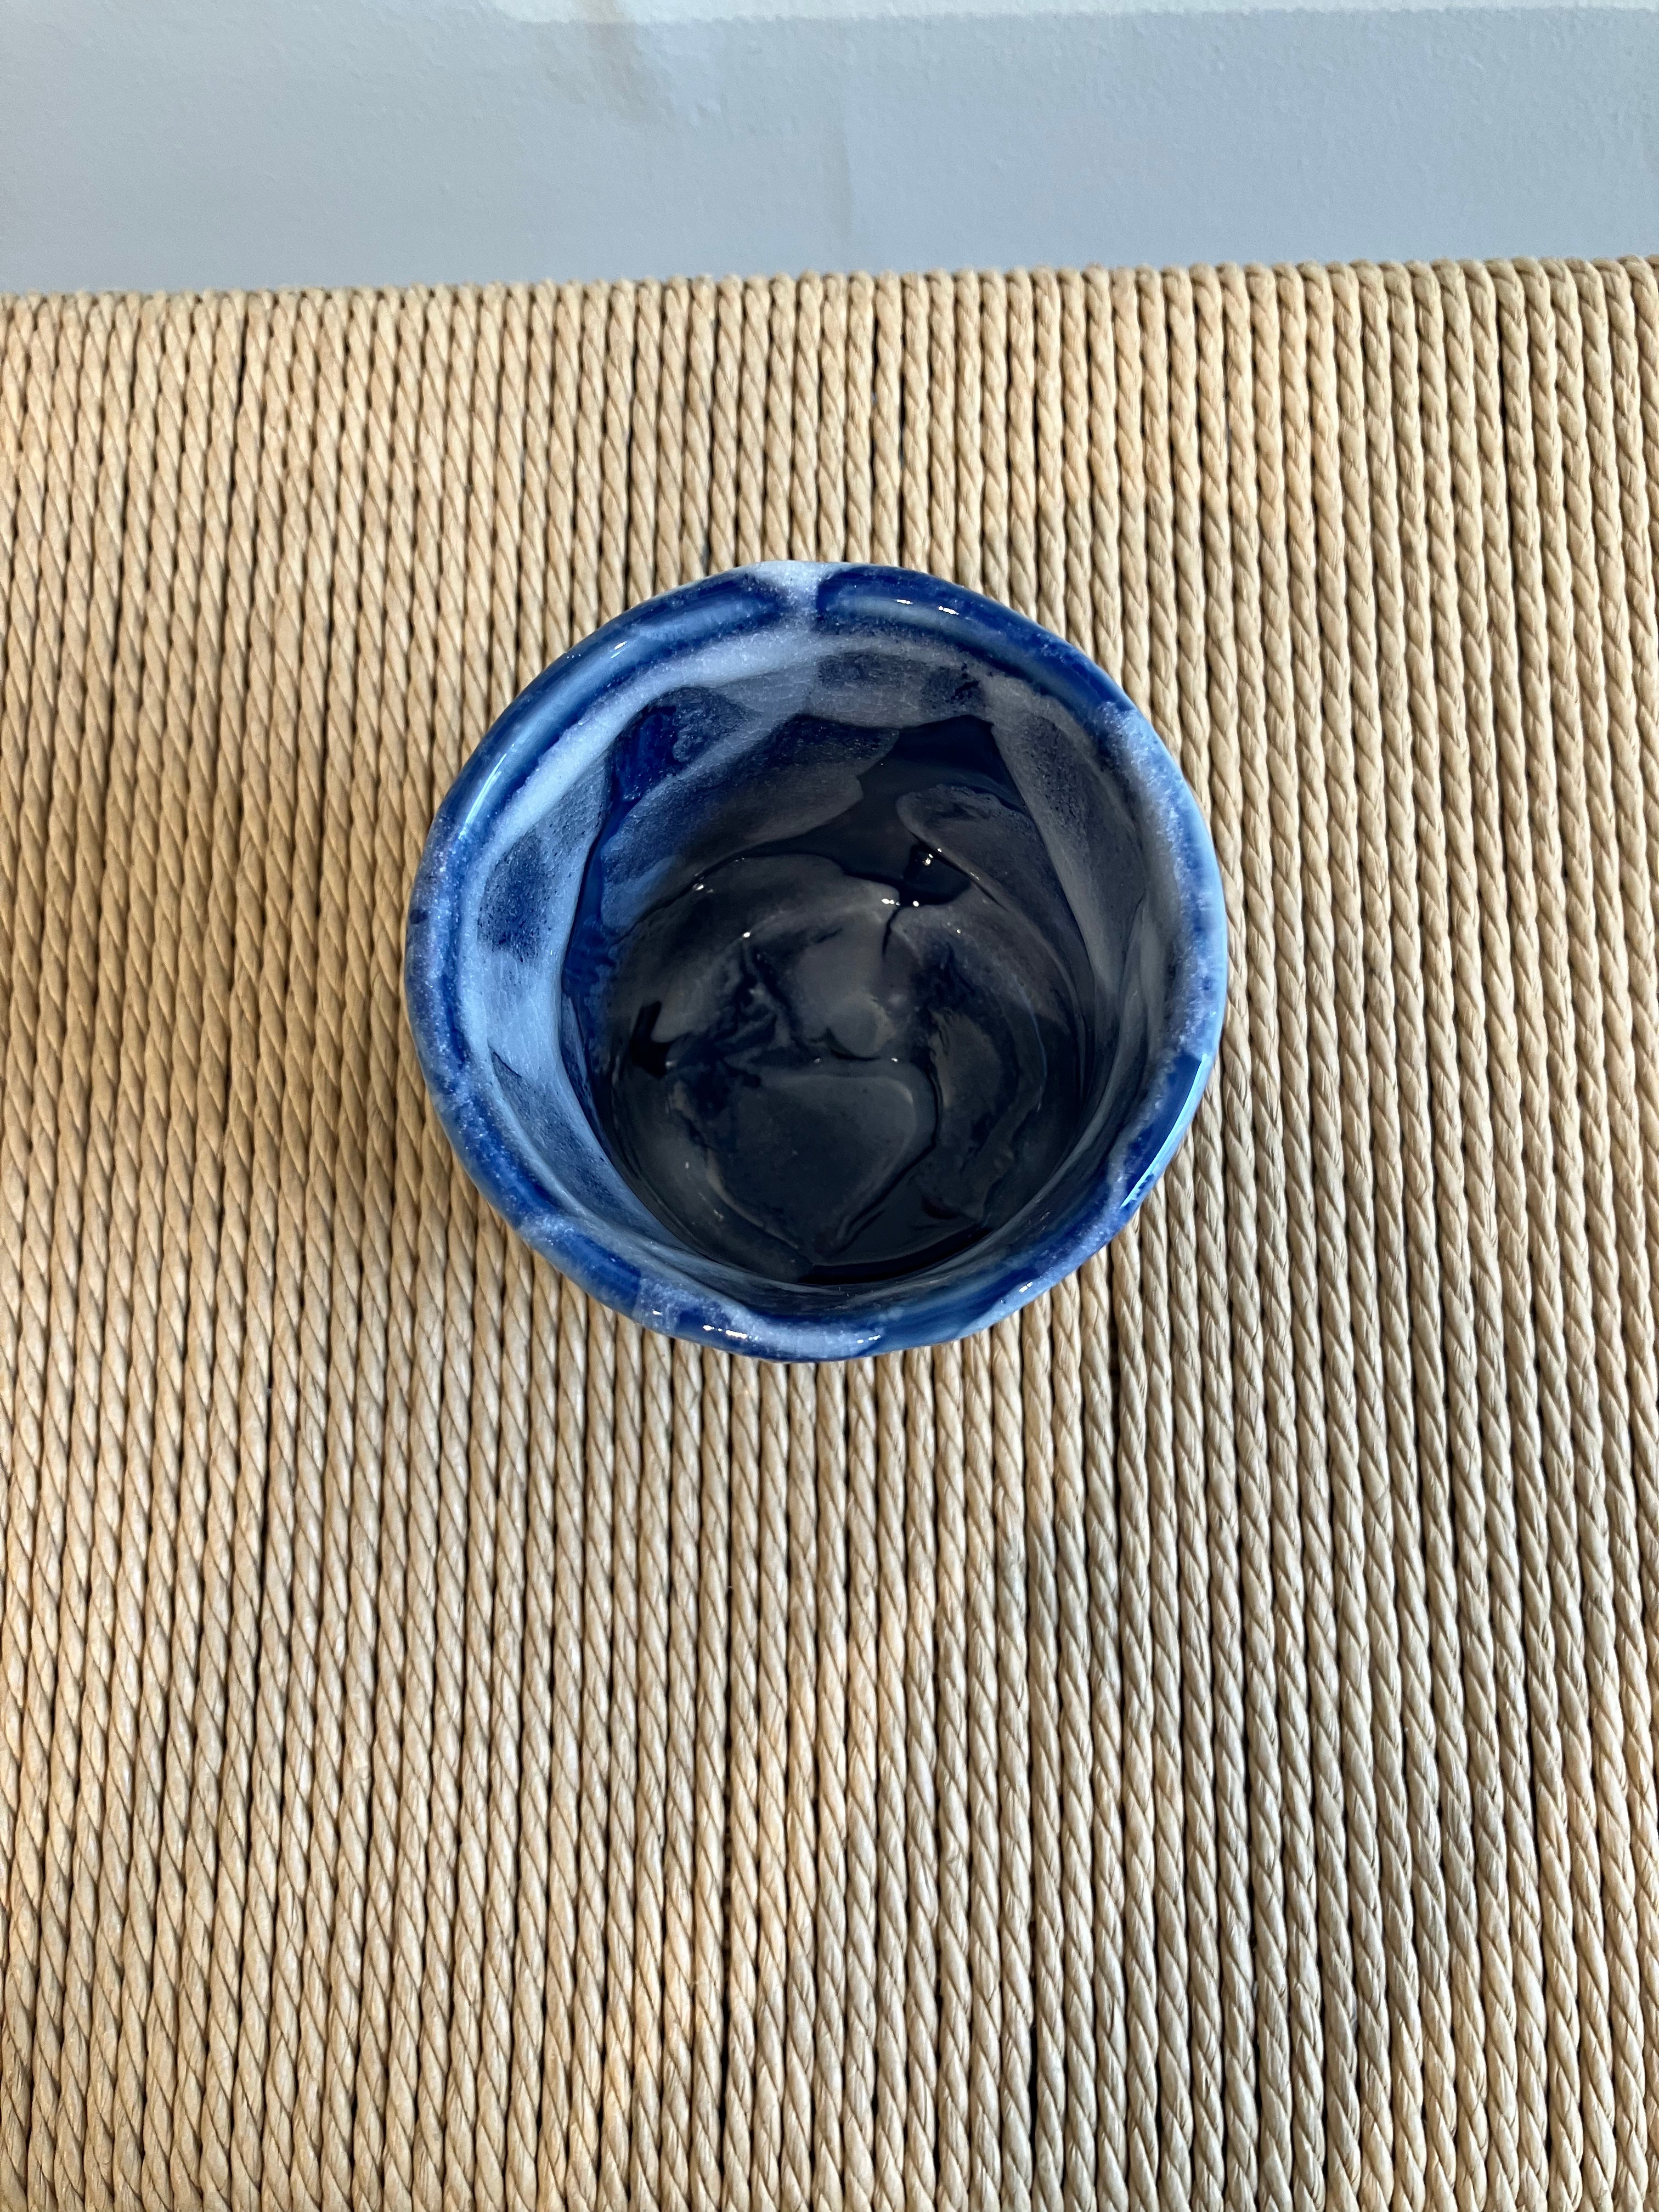 Ceramic cup with blue glaze and white details